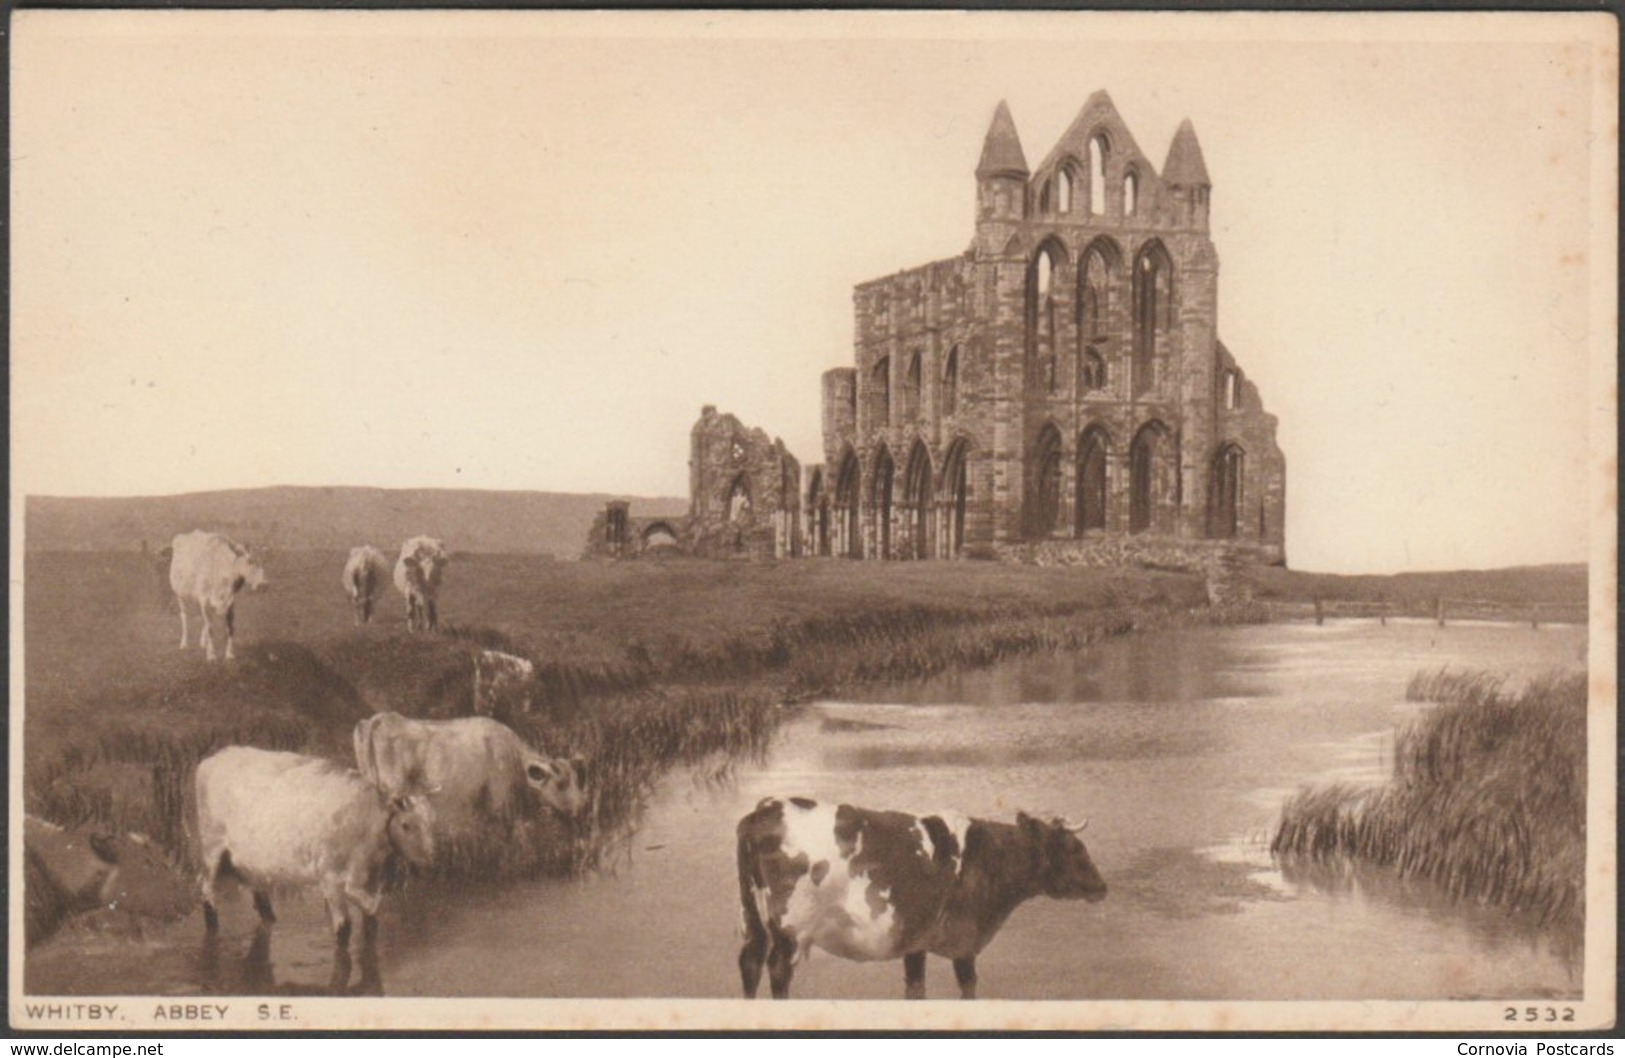 South East, Abbey, Whitby, Yorkshire, C.1920s - Photochrom Postcard - Whitby